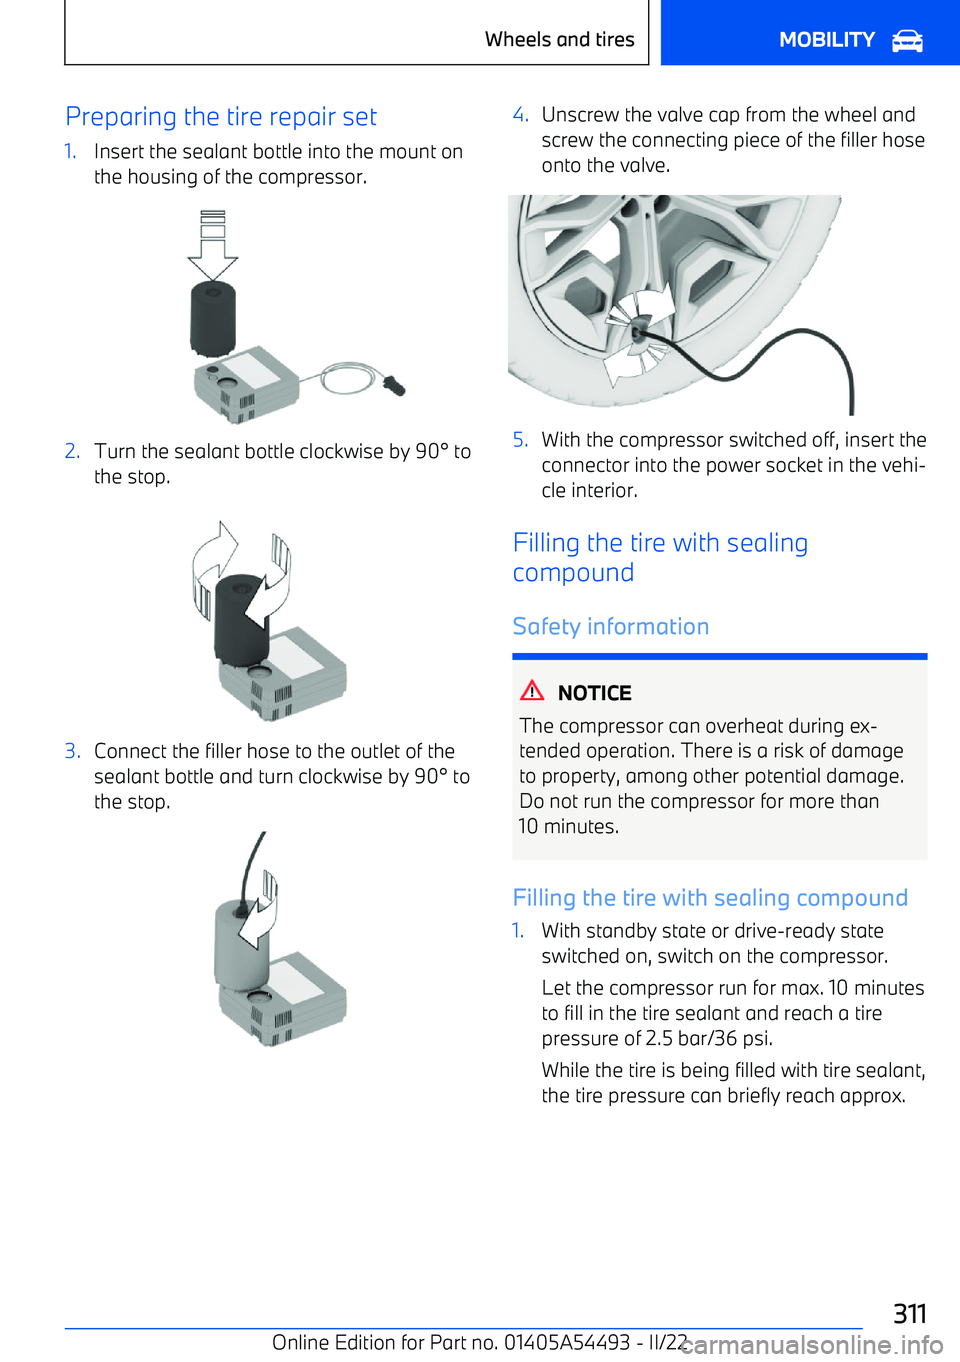 BMW IX 2022  Owners Manual Preparing the tire repair set1.Insert the sealant bottle into the mount onthe housing of the compressor.2.Turn the sealant bottle clockwise by 90